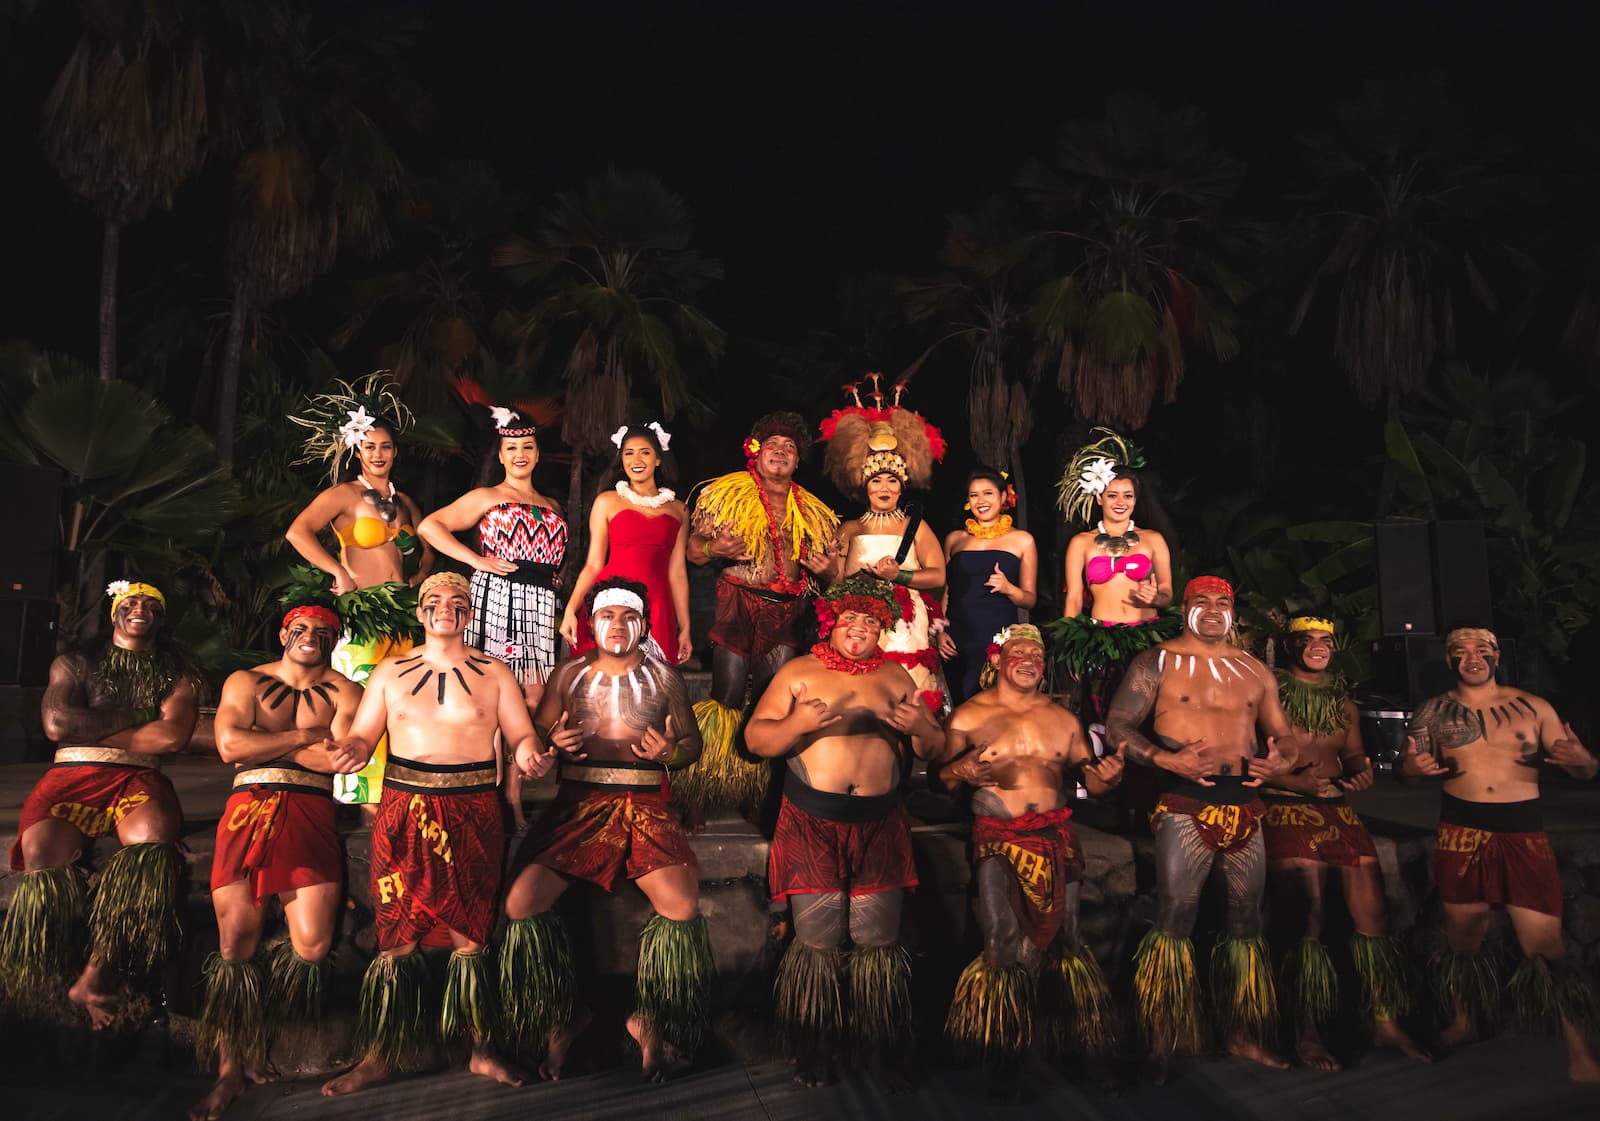 The cast of Myths of Maui, Maui luaus, gather after their performance.